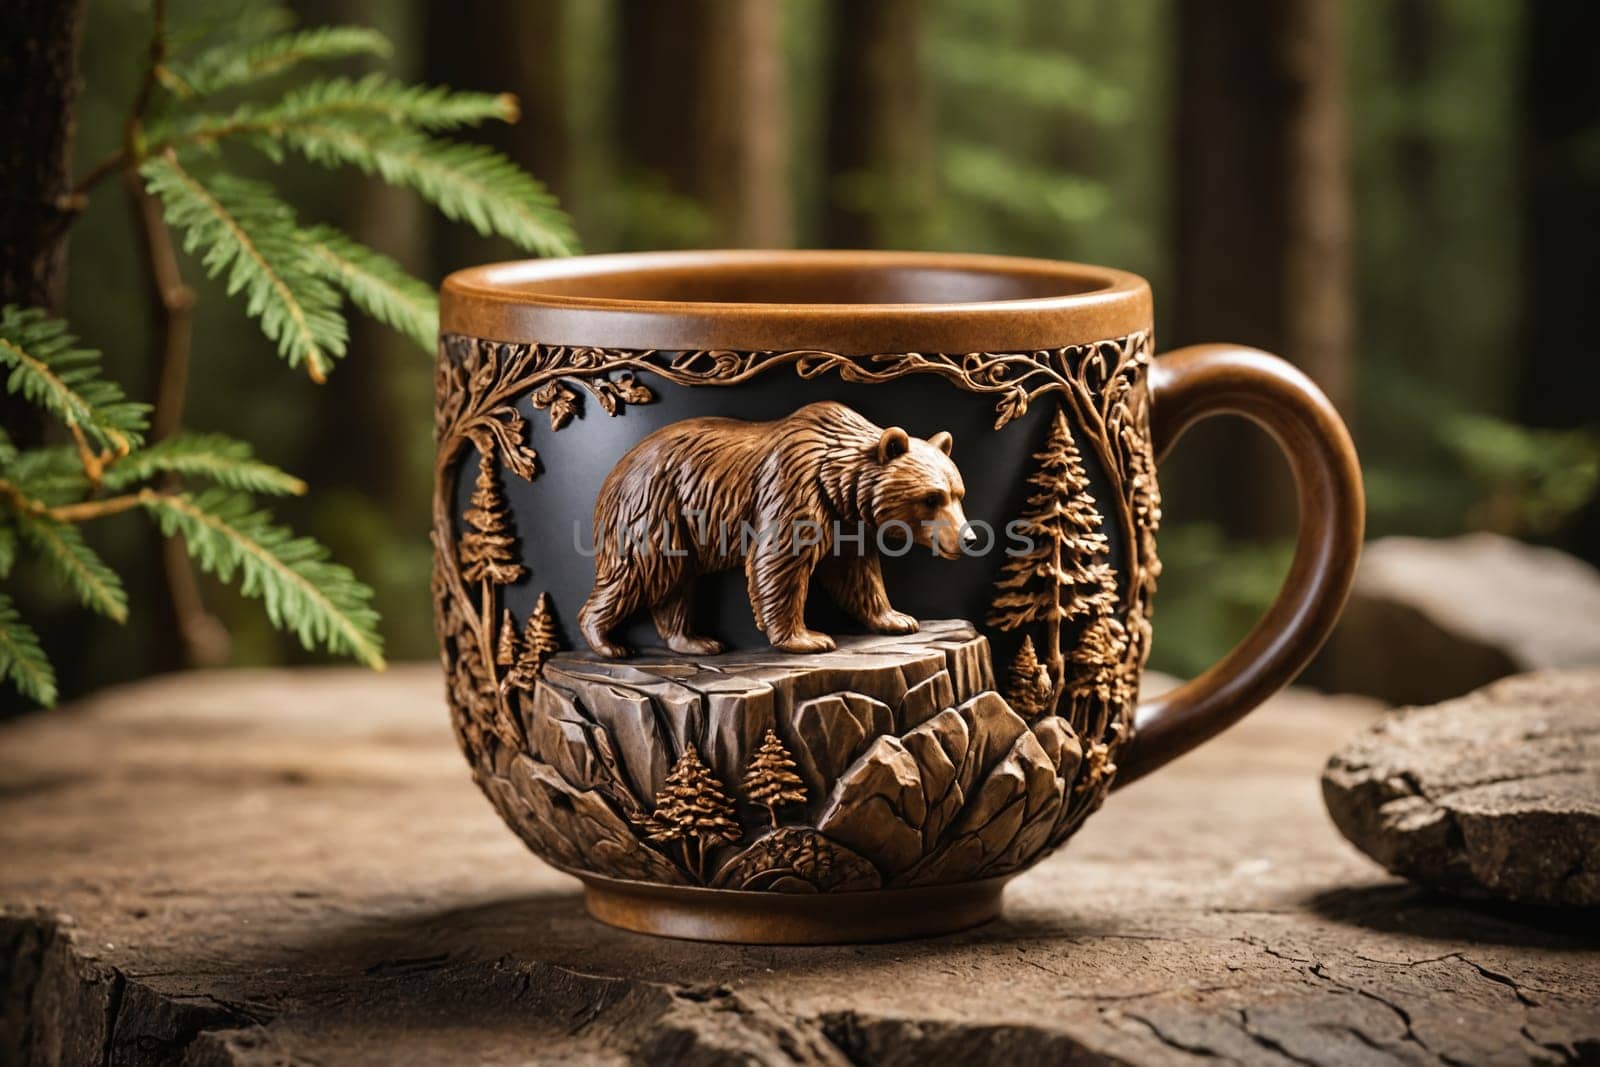 Embrace the wild with this ceramic mug, featuring a 3D bear and detailed mountain landscape.